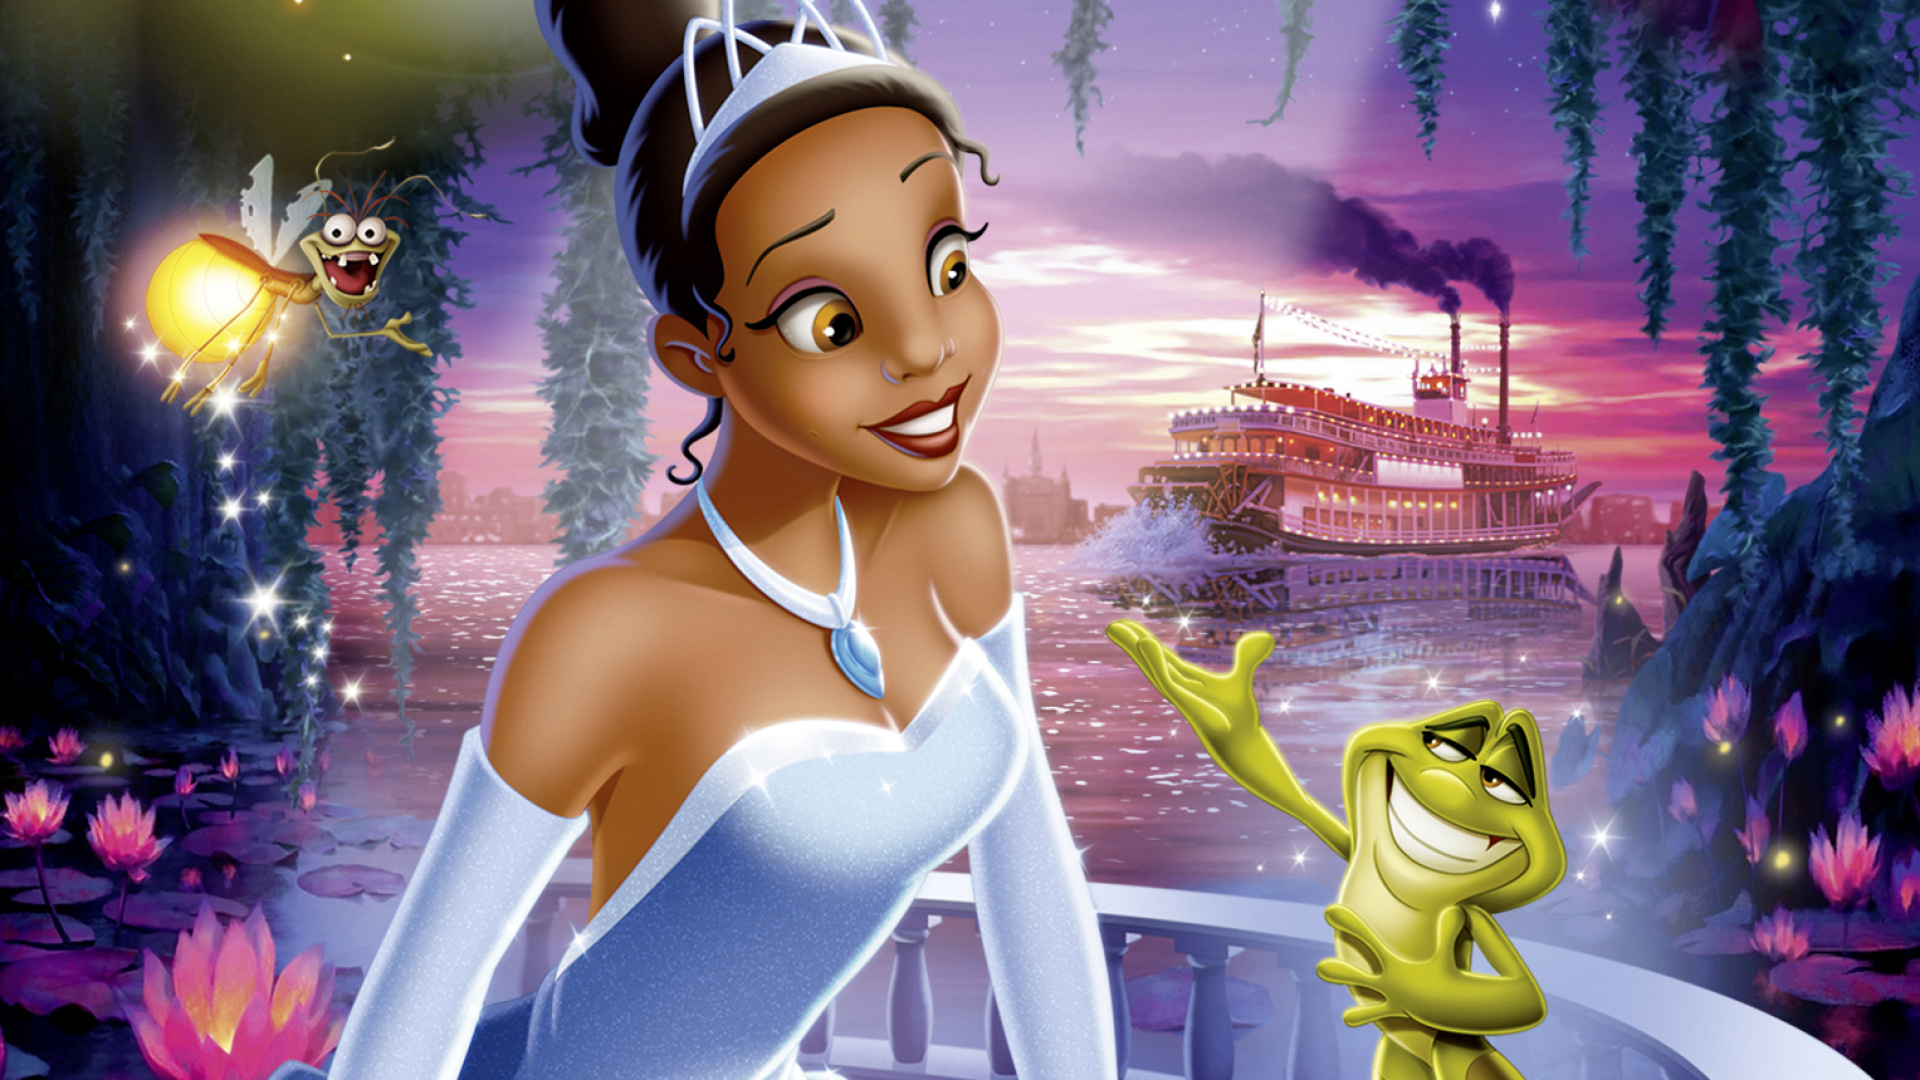 Tiana, The Princess and the Frog formation, Music reimagination, 1920x1080 Full HD Desktop